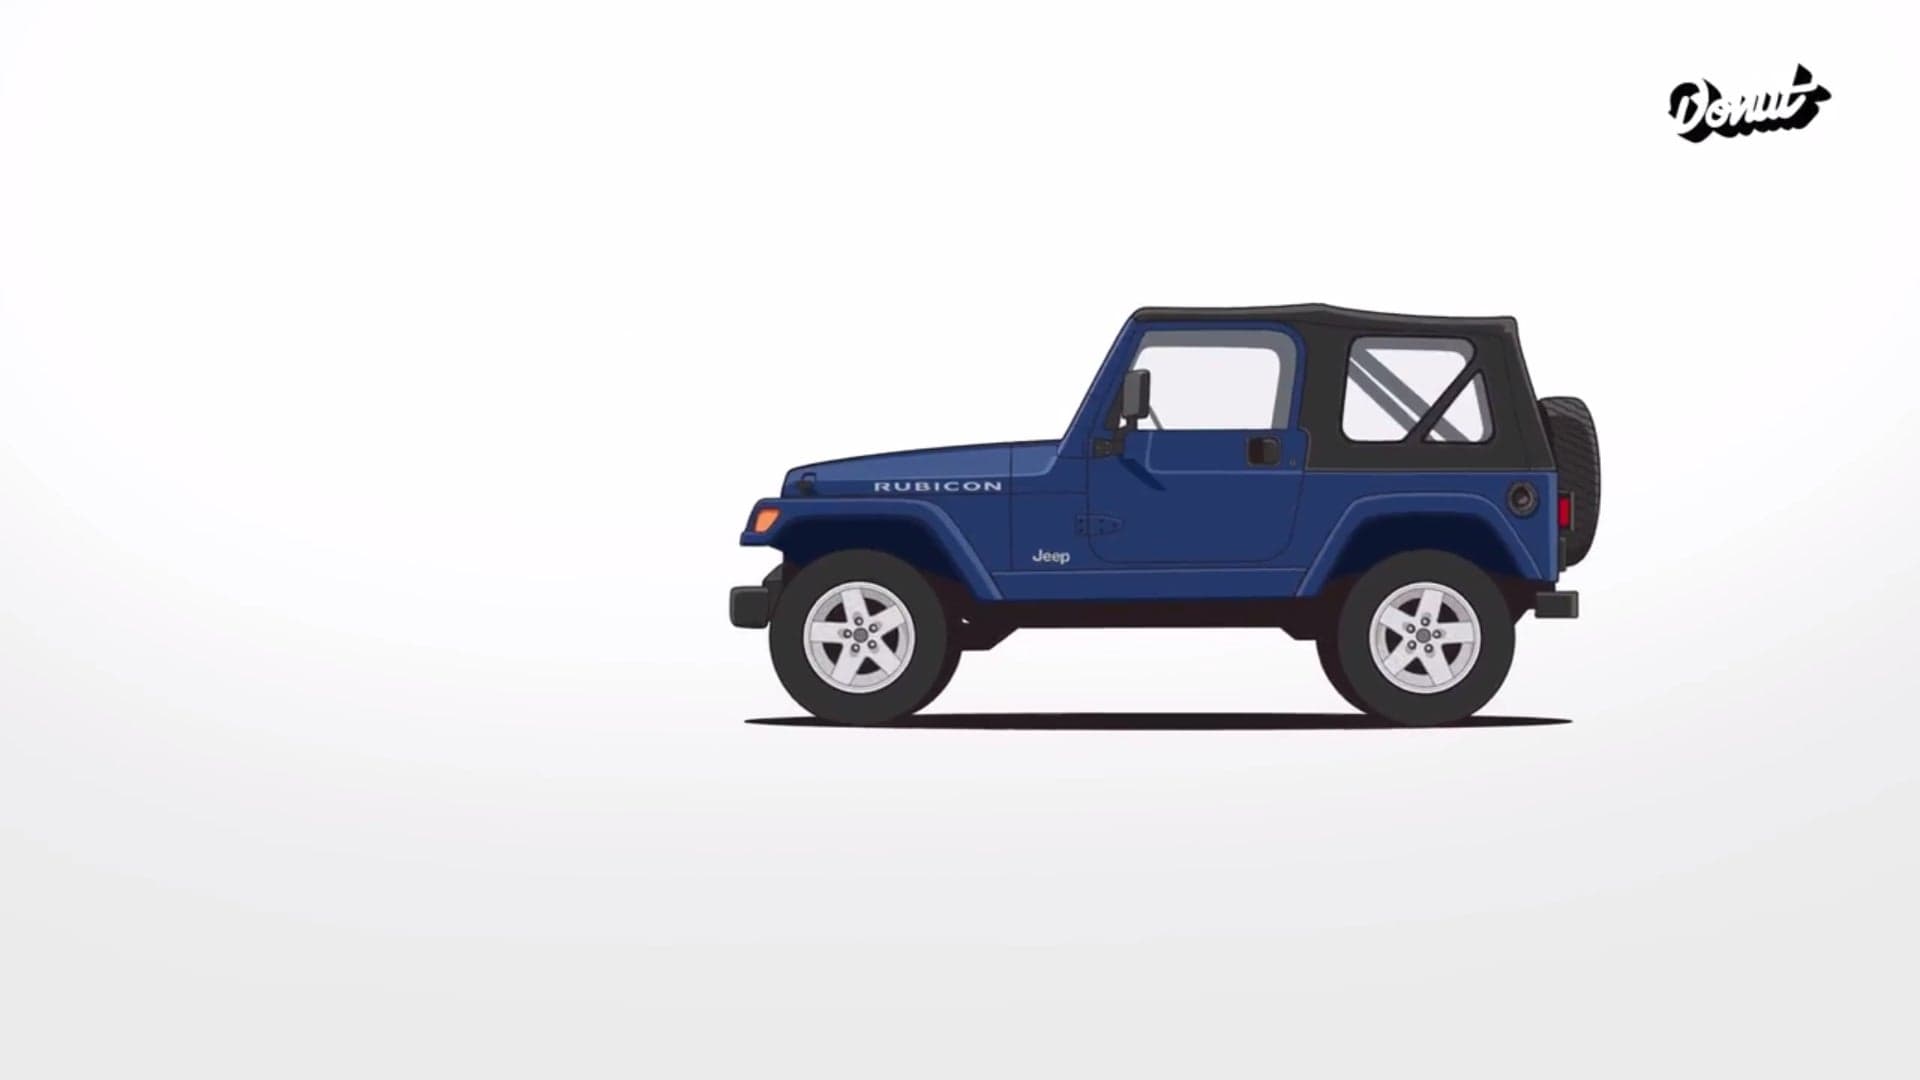 Check out the Evolution of the Jeep 4×4